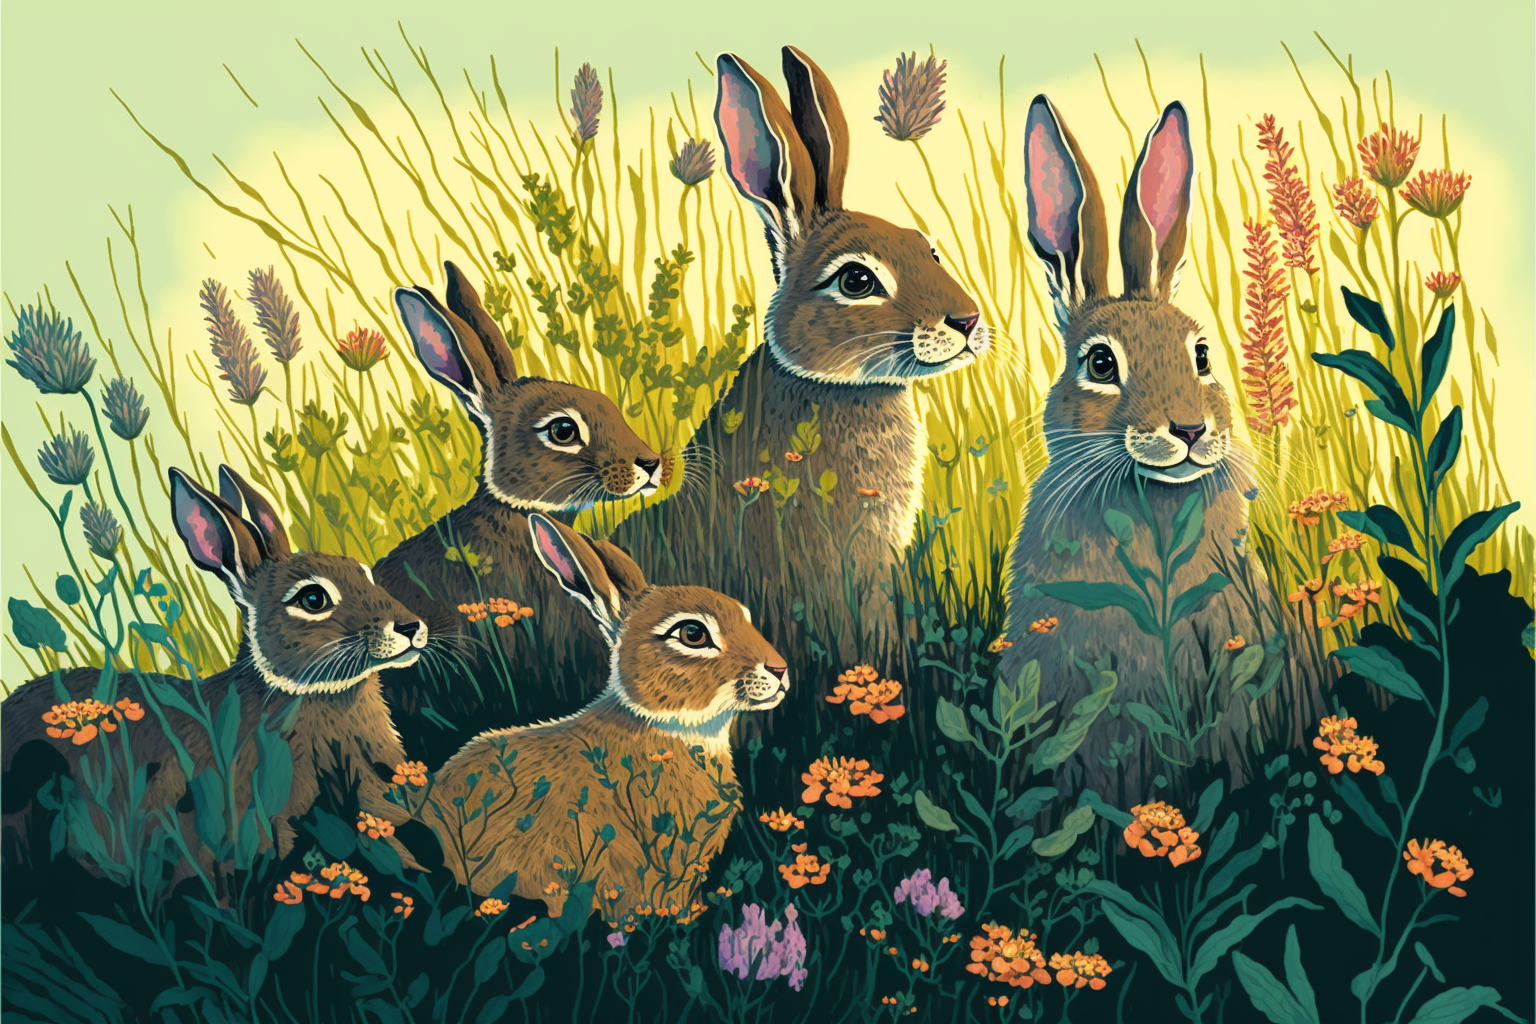 The Hares and the Frogs